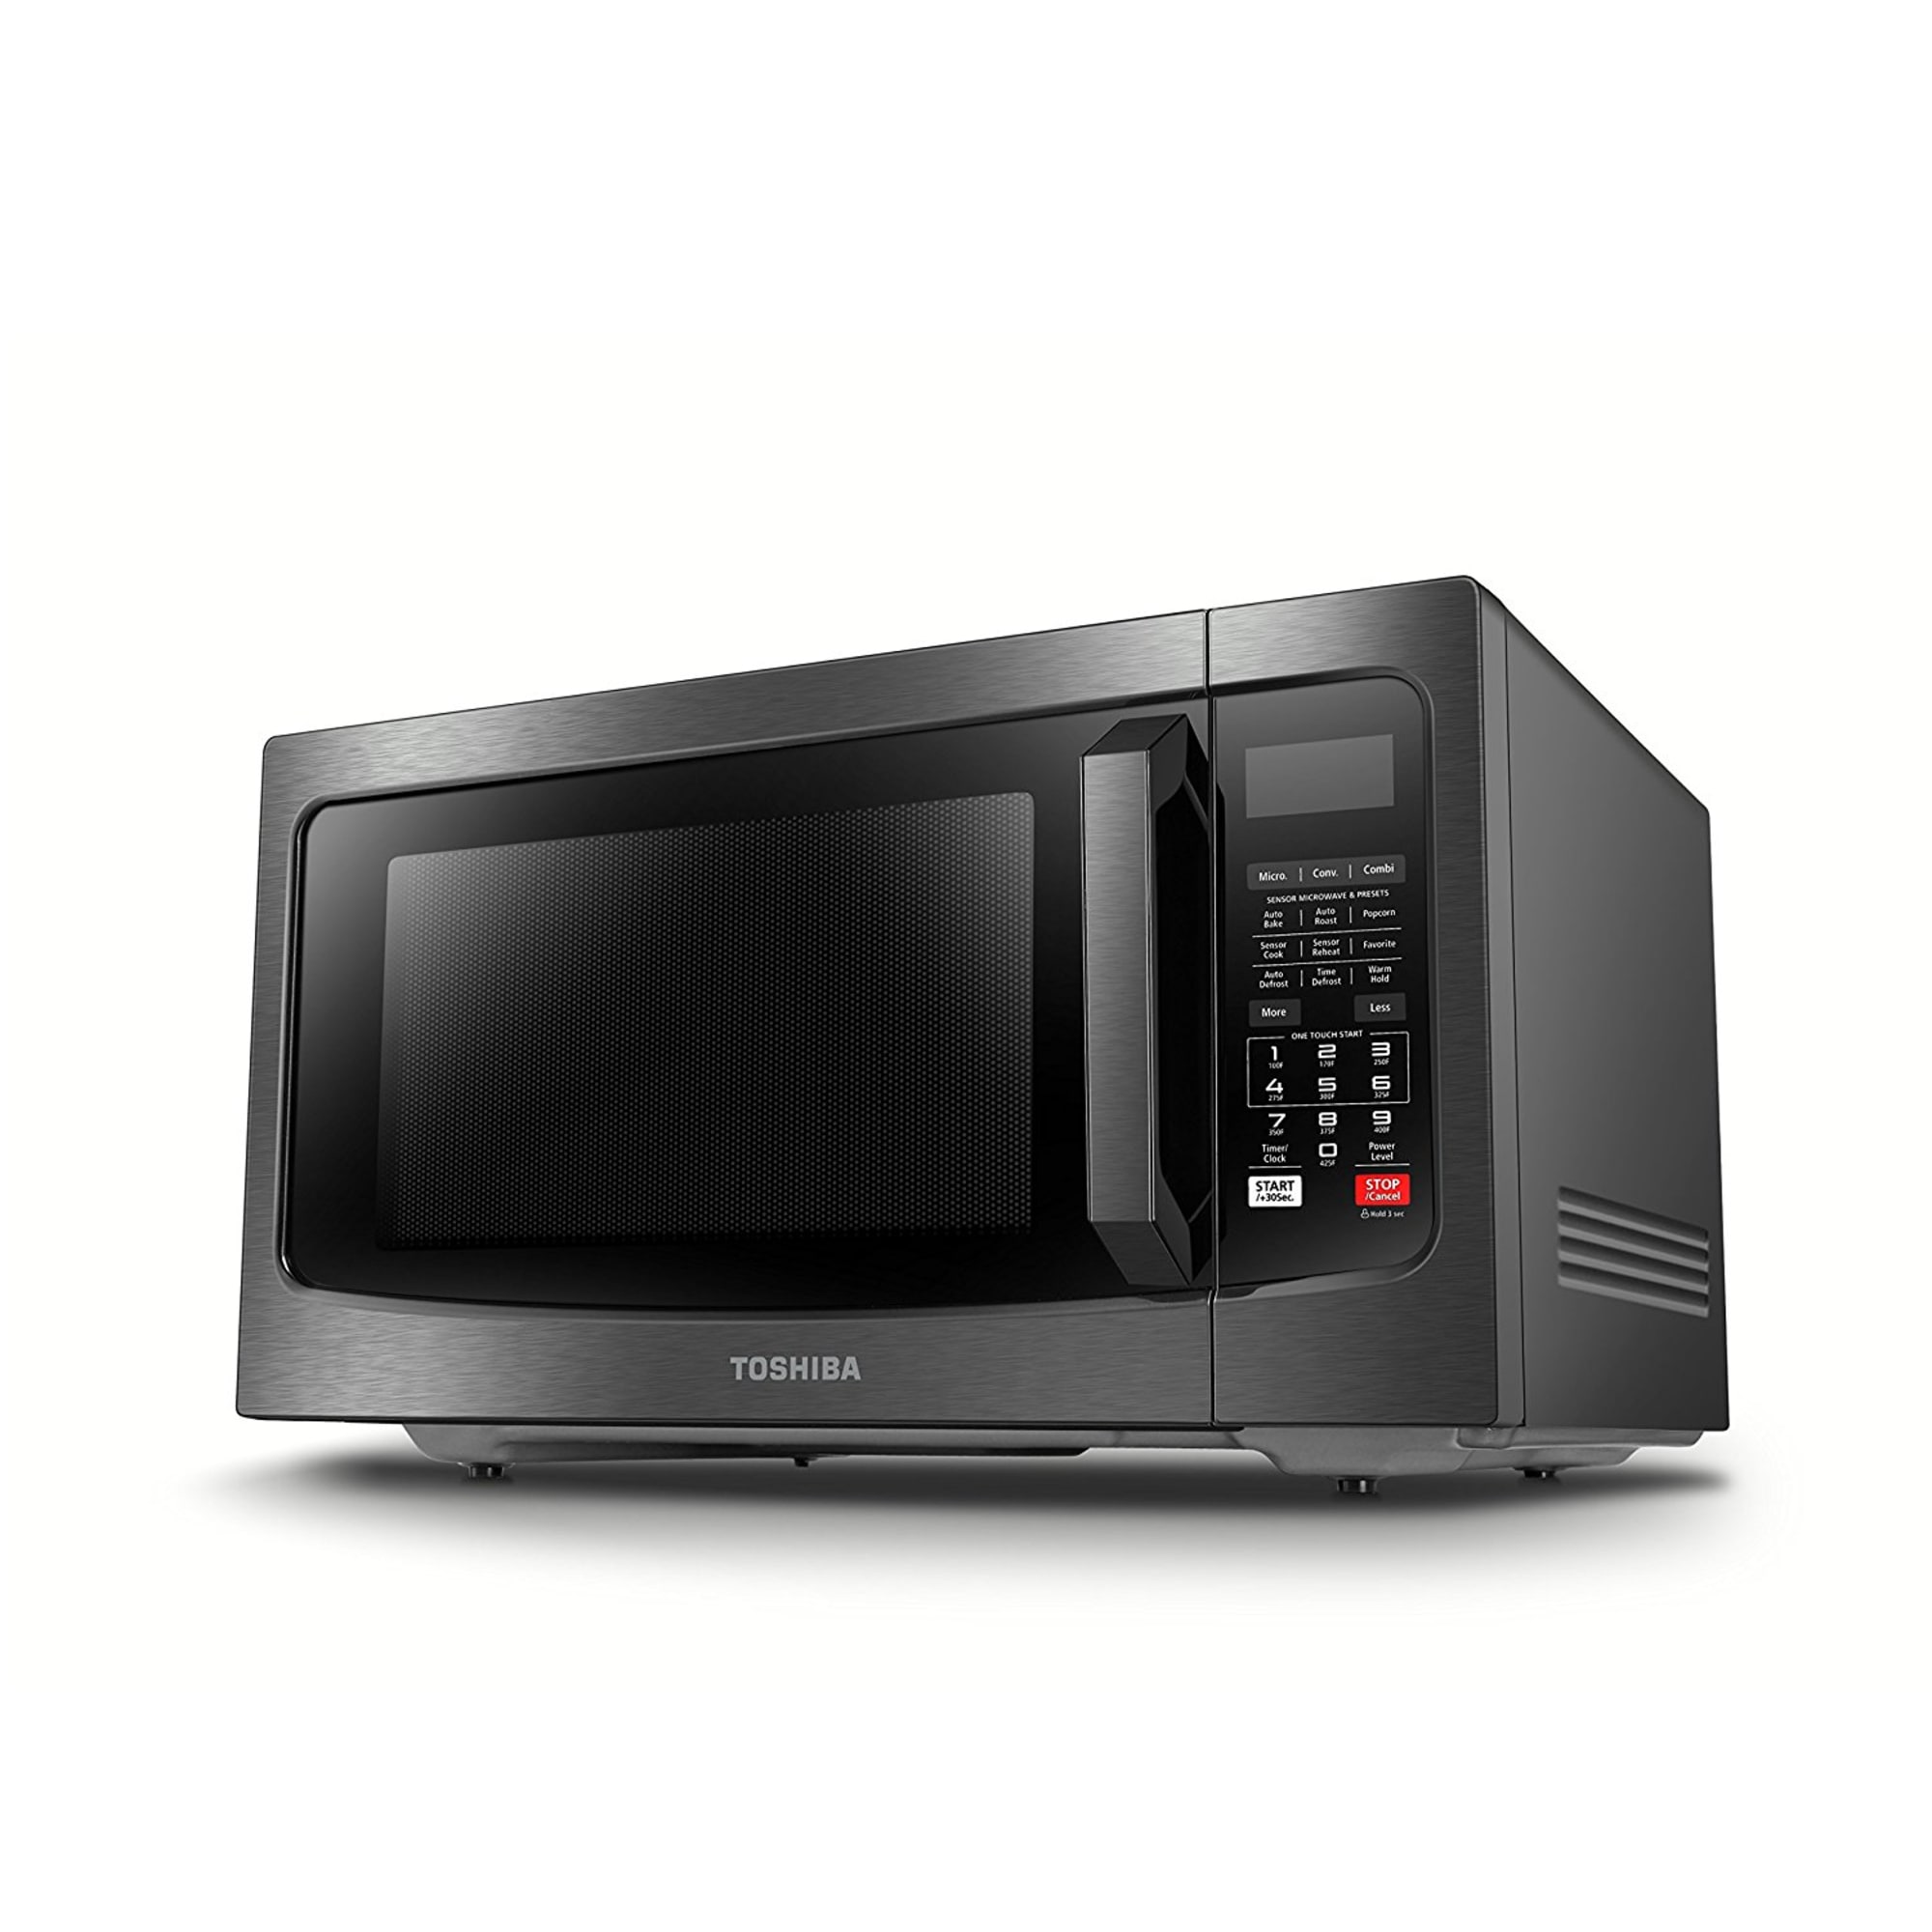 Toshiba ML2-EC42SAESS 1.5 Cu. Ft. Convection Microwave, Stainless Steel - image 3 of 8